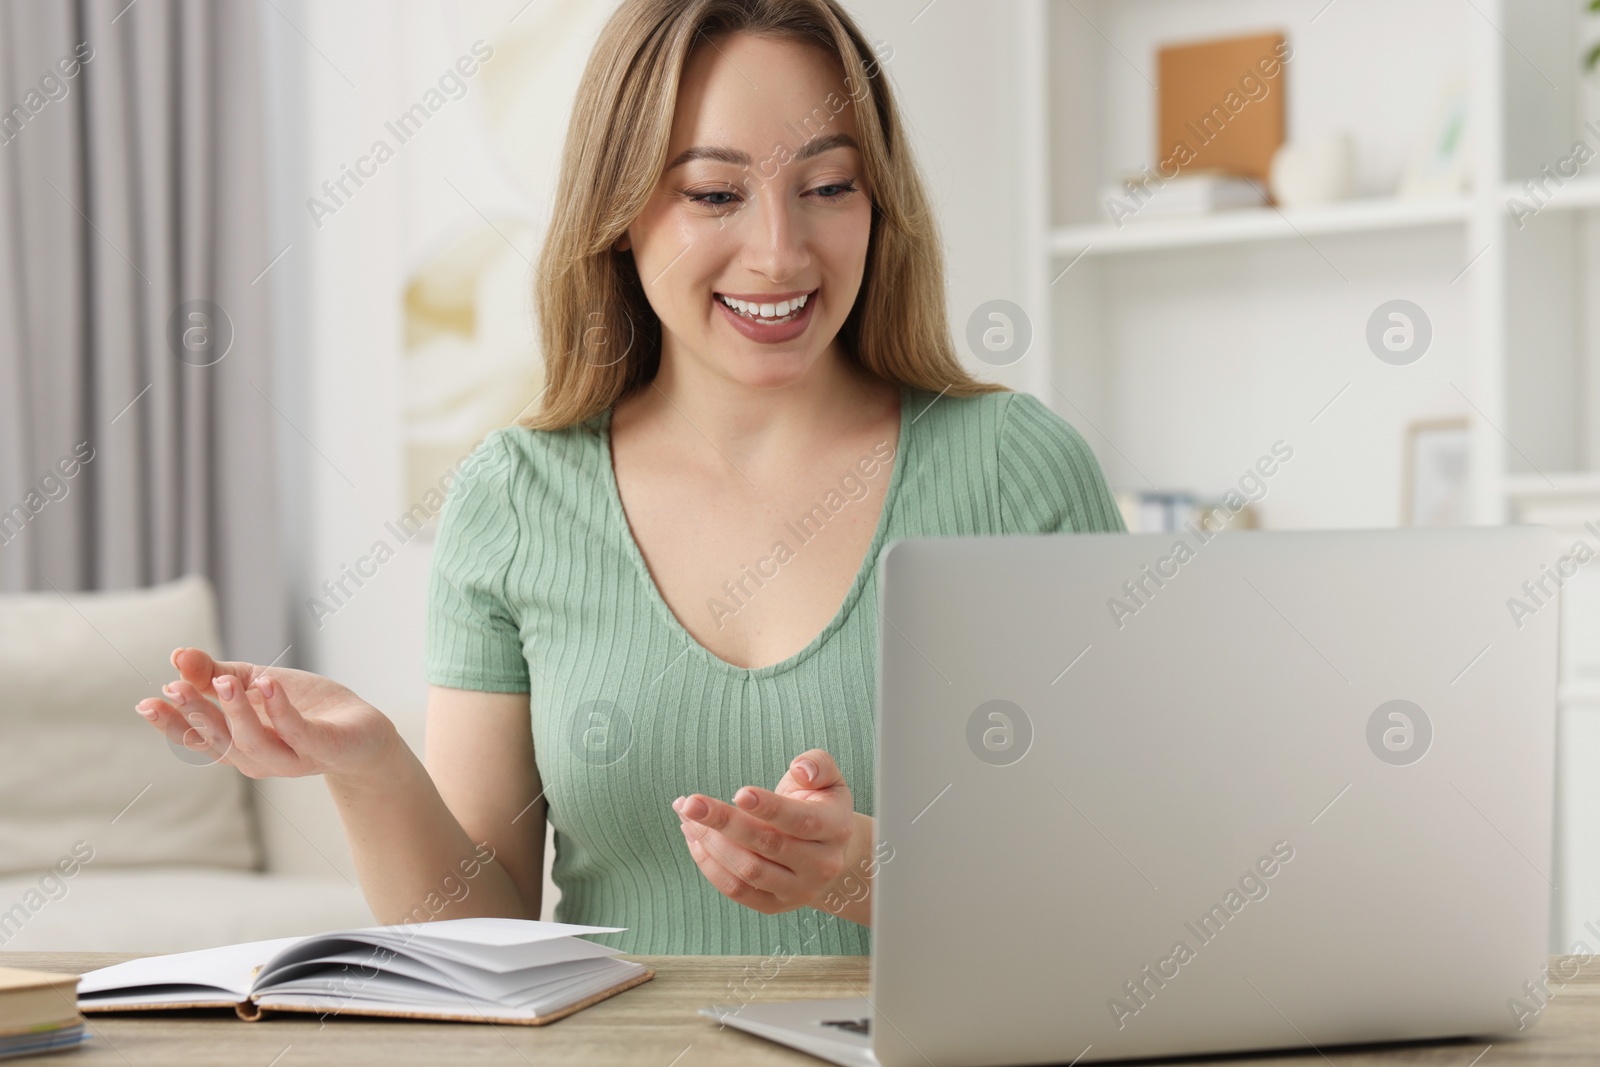 Photo of Young woman waving hello during video chat via laptop at wooden table indoors